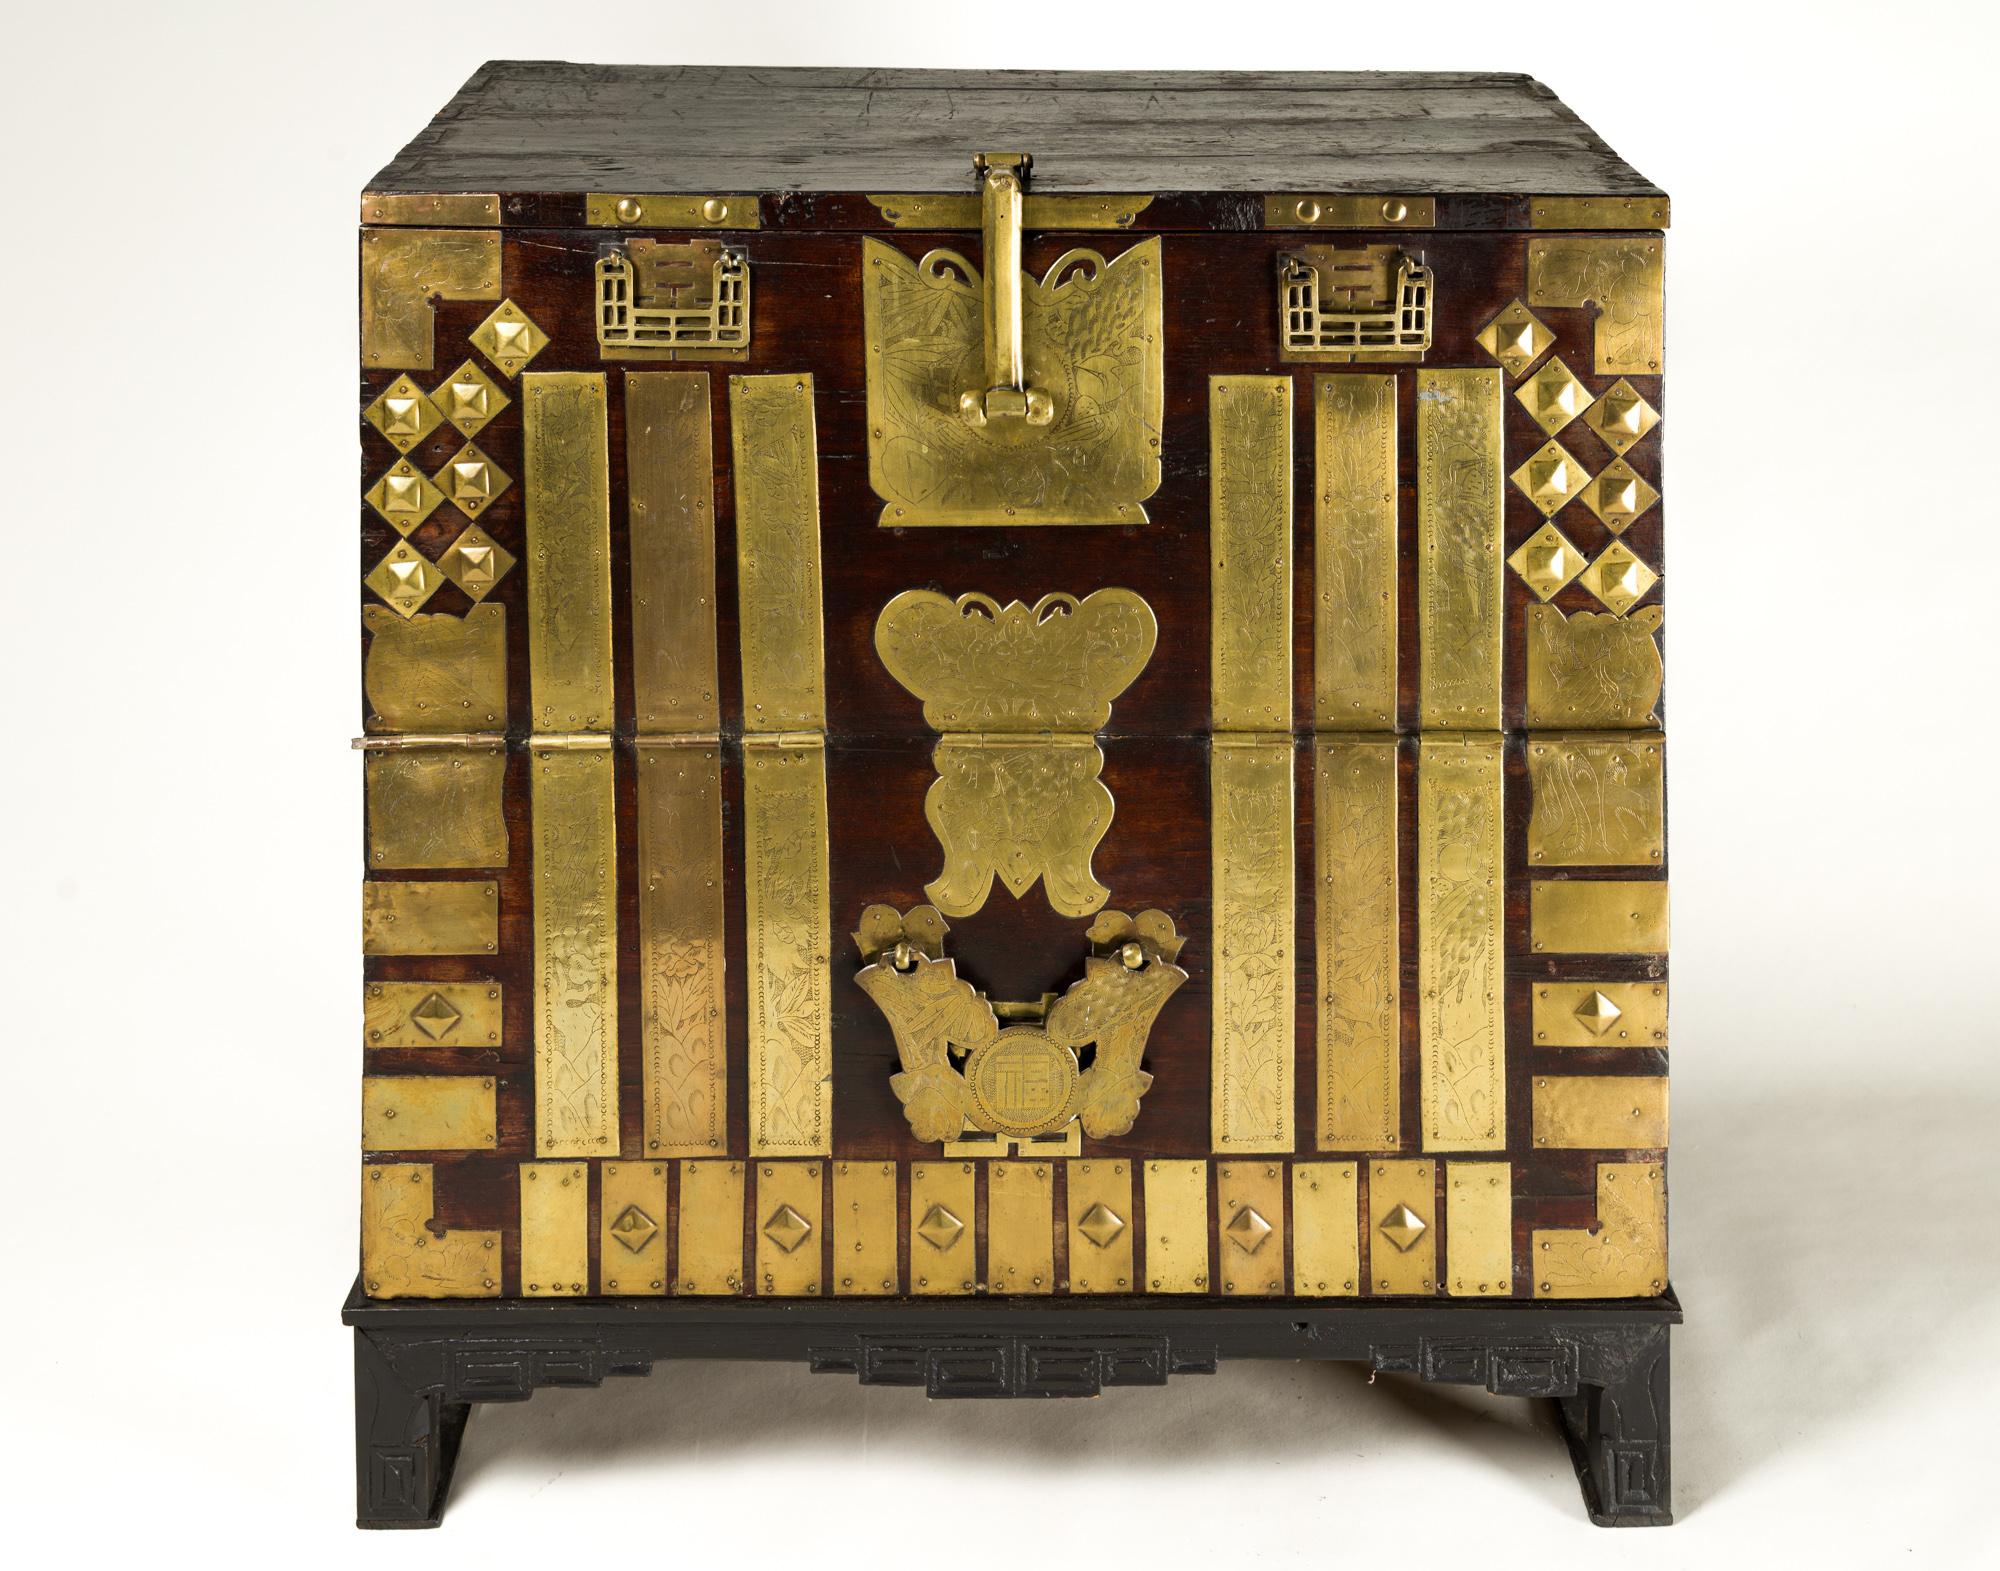 Antique Korean Blanket chest, elaborately decorated with ornate brass mounts in various geometric forms, some of which have incised landscapes and other imagery like pine and bamboo. The chest also has a butterfly shaped lock plate and is decorated